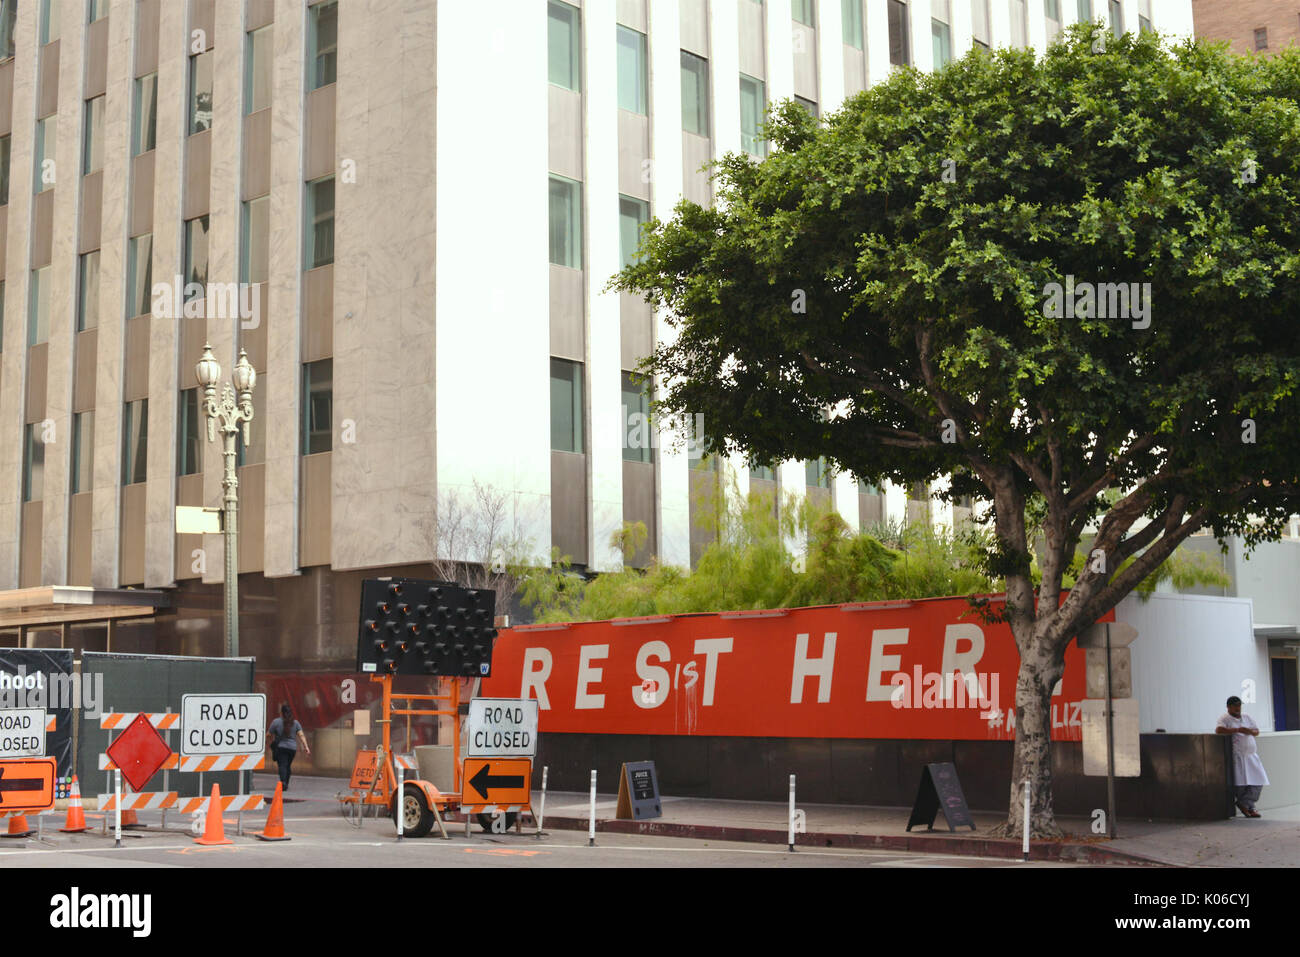 'Resist' Graffiti Standard Hotel's 'Rest Here' sign Standard Hotel DTLA during Solar Eclipse Monday August 21,2017 Los Angeles. Stock Photo